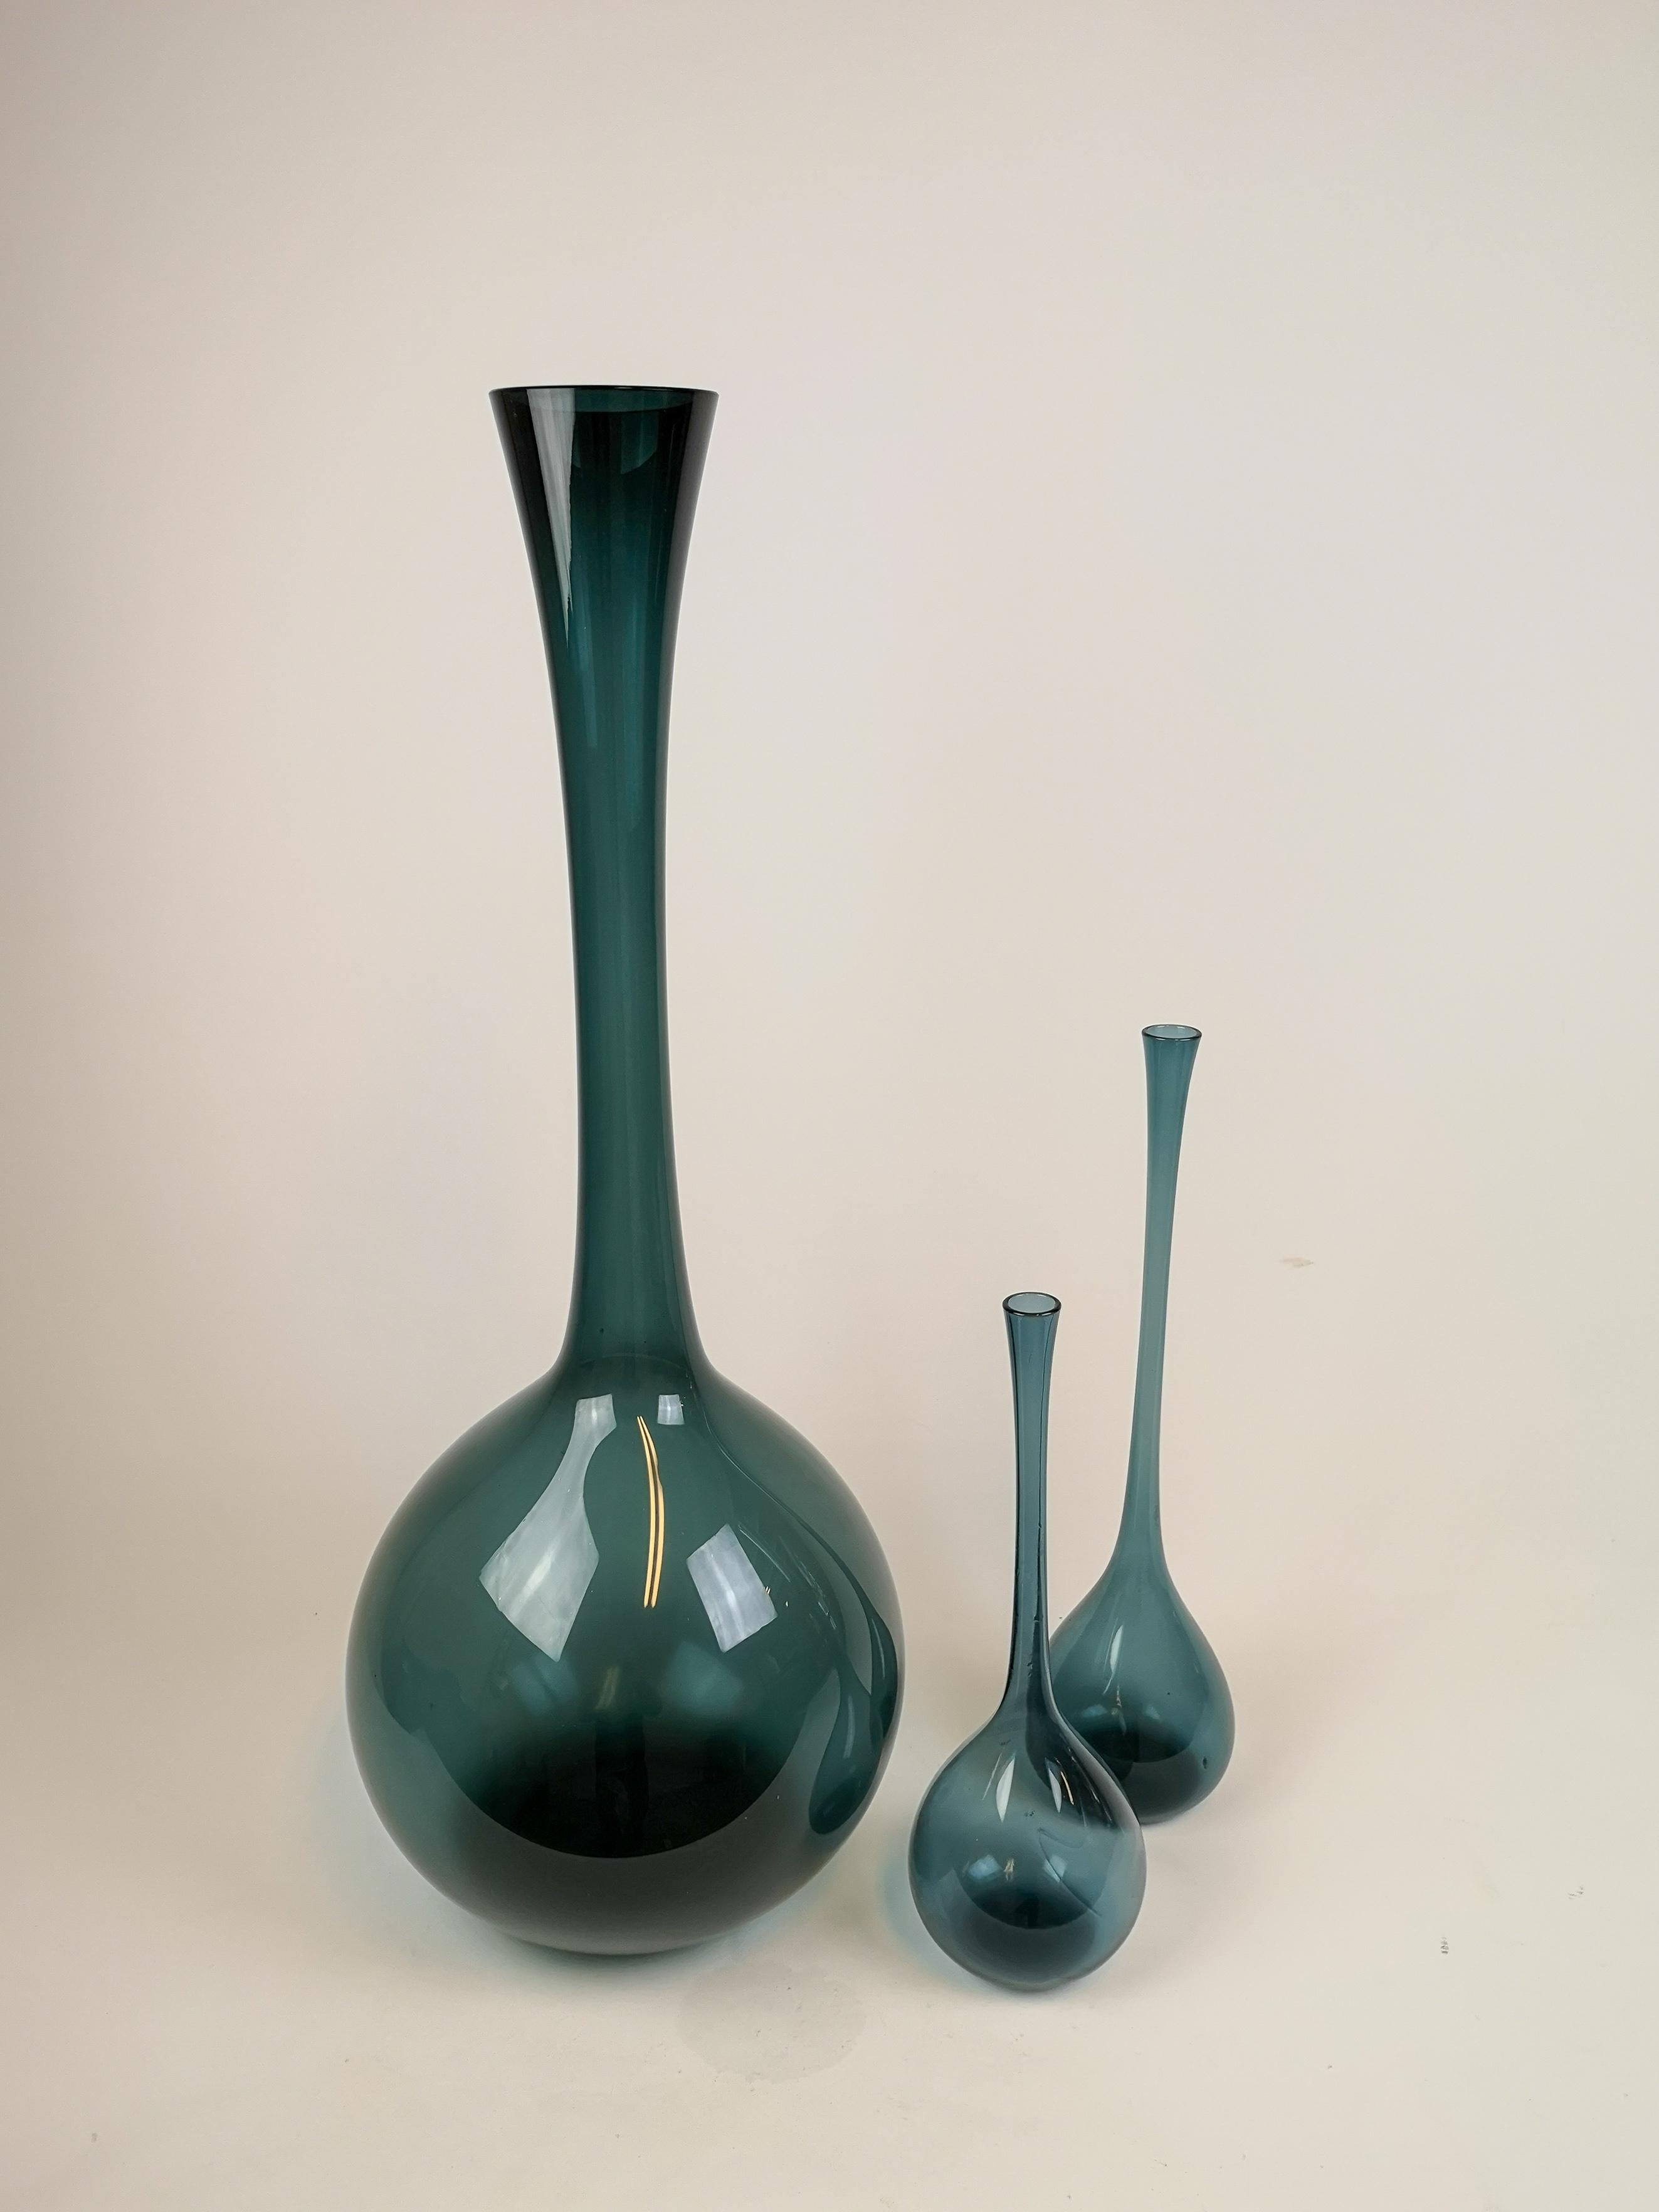 These three blue vases were made at Gullaskruf in sweden 1940s-1950s and designed by famous Arthur Percy. They are all in blue color and with different lengths. The large one 71 cm has a darker tone in its color. 

Good condition. 

Measures H